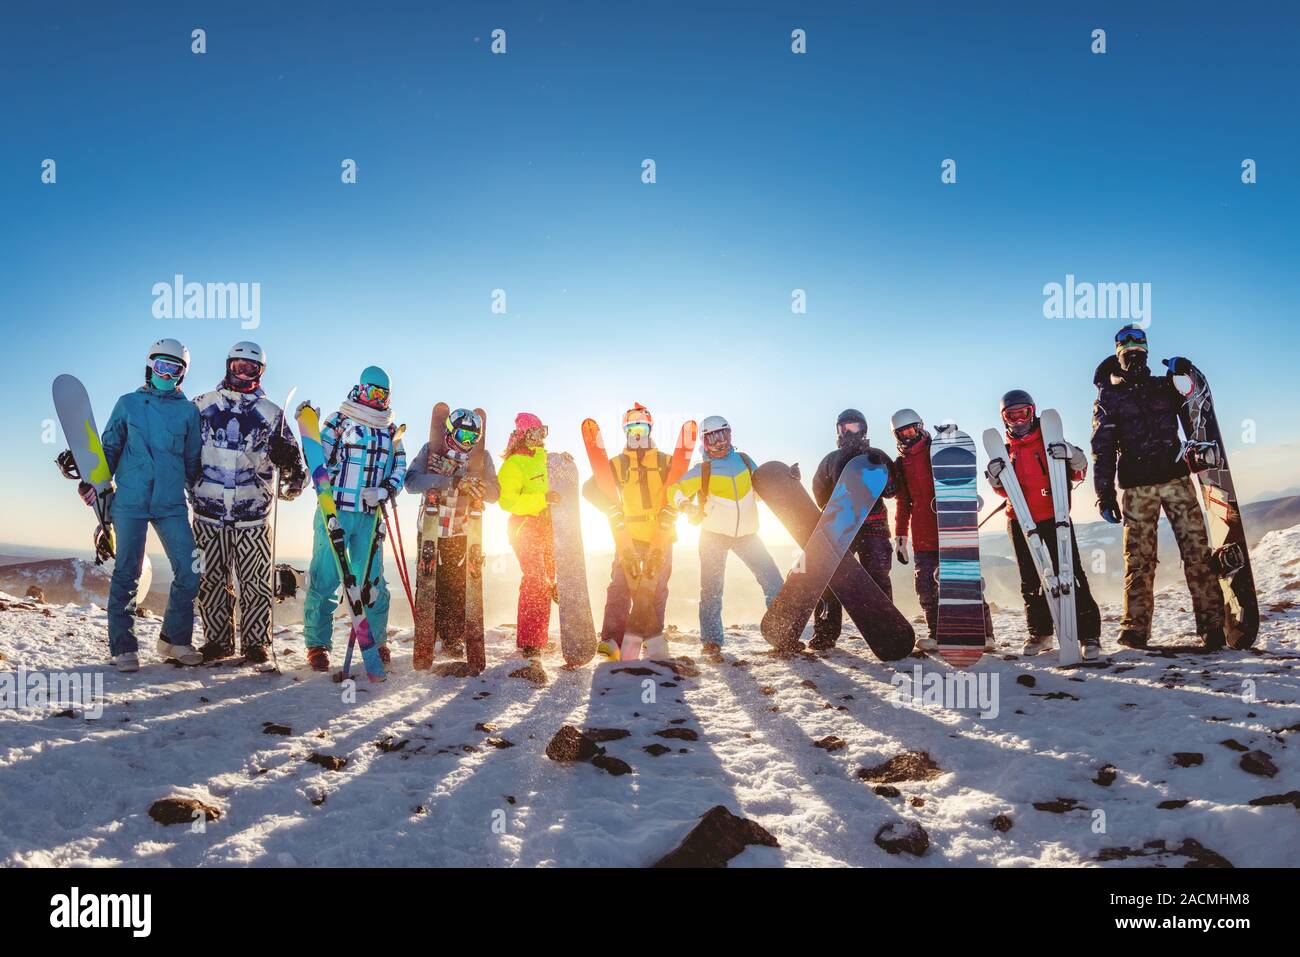 Big group of friends skiers and snowboarders are posing with equipment at sunset mountain Stock Photo